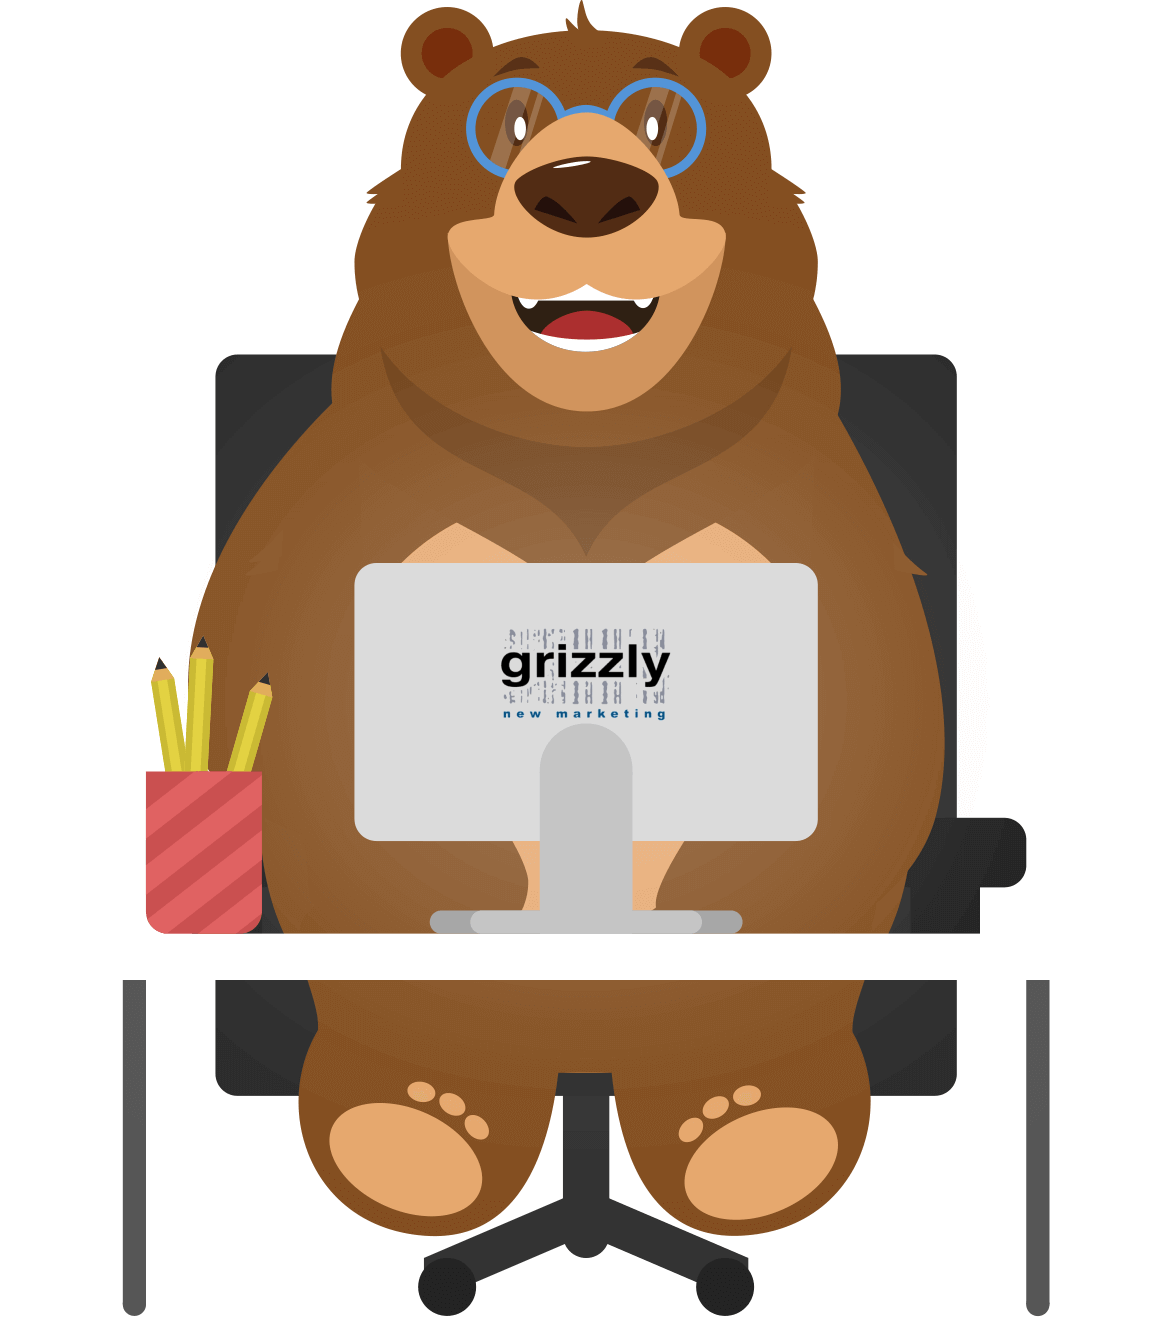 designbeer-grizzly